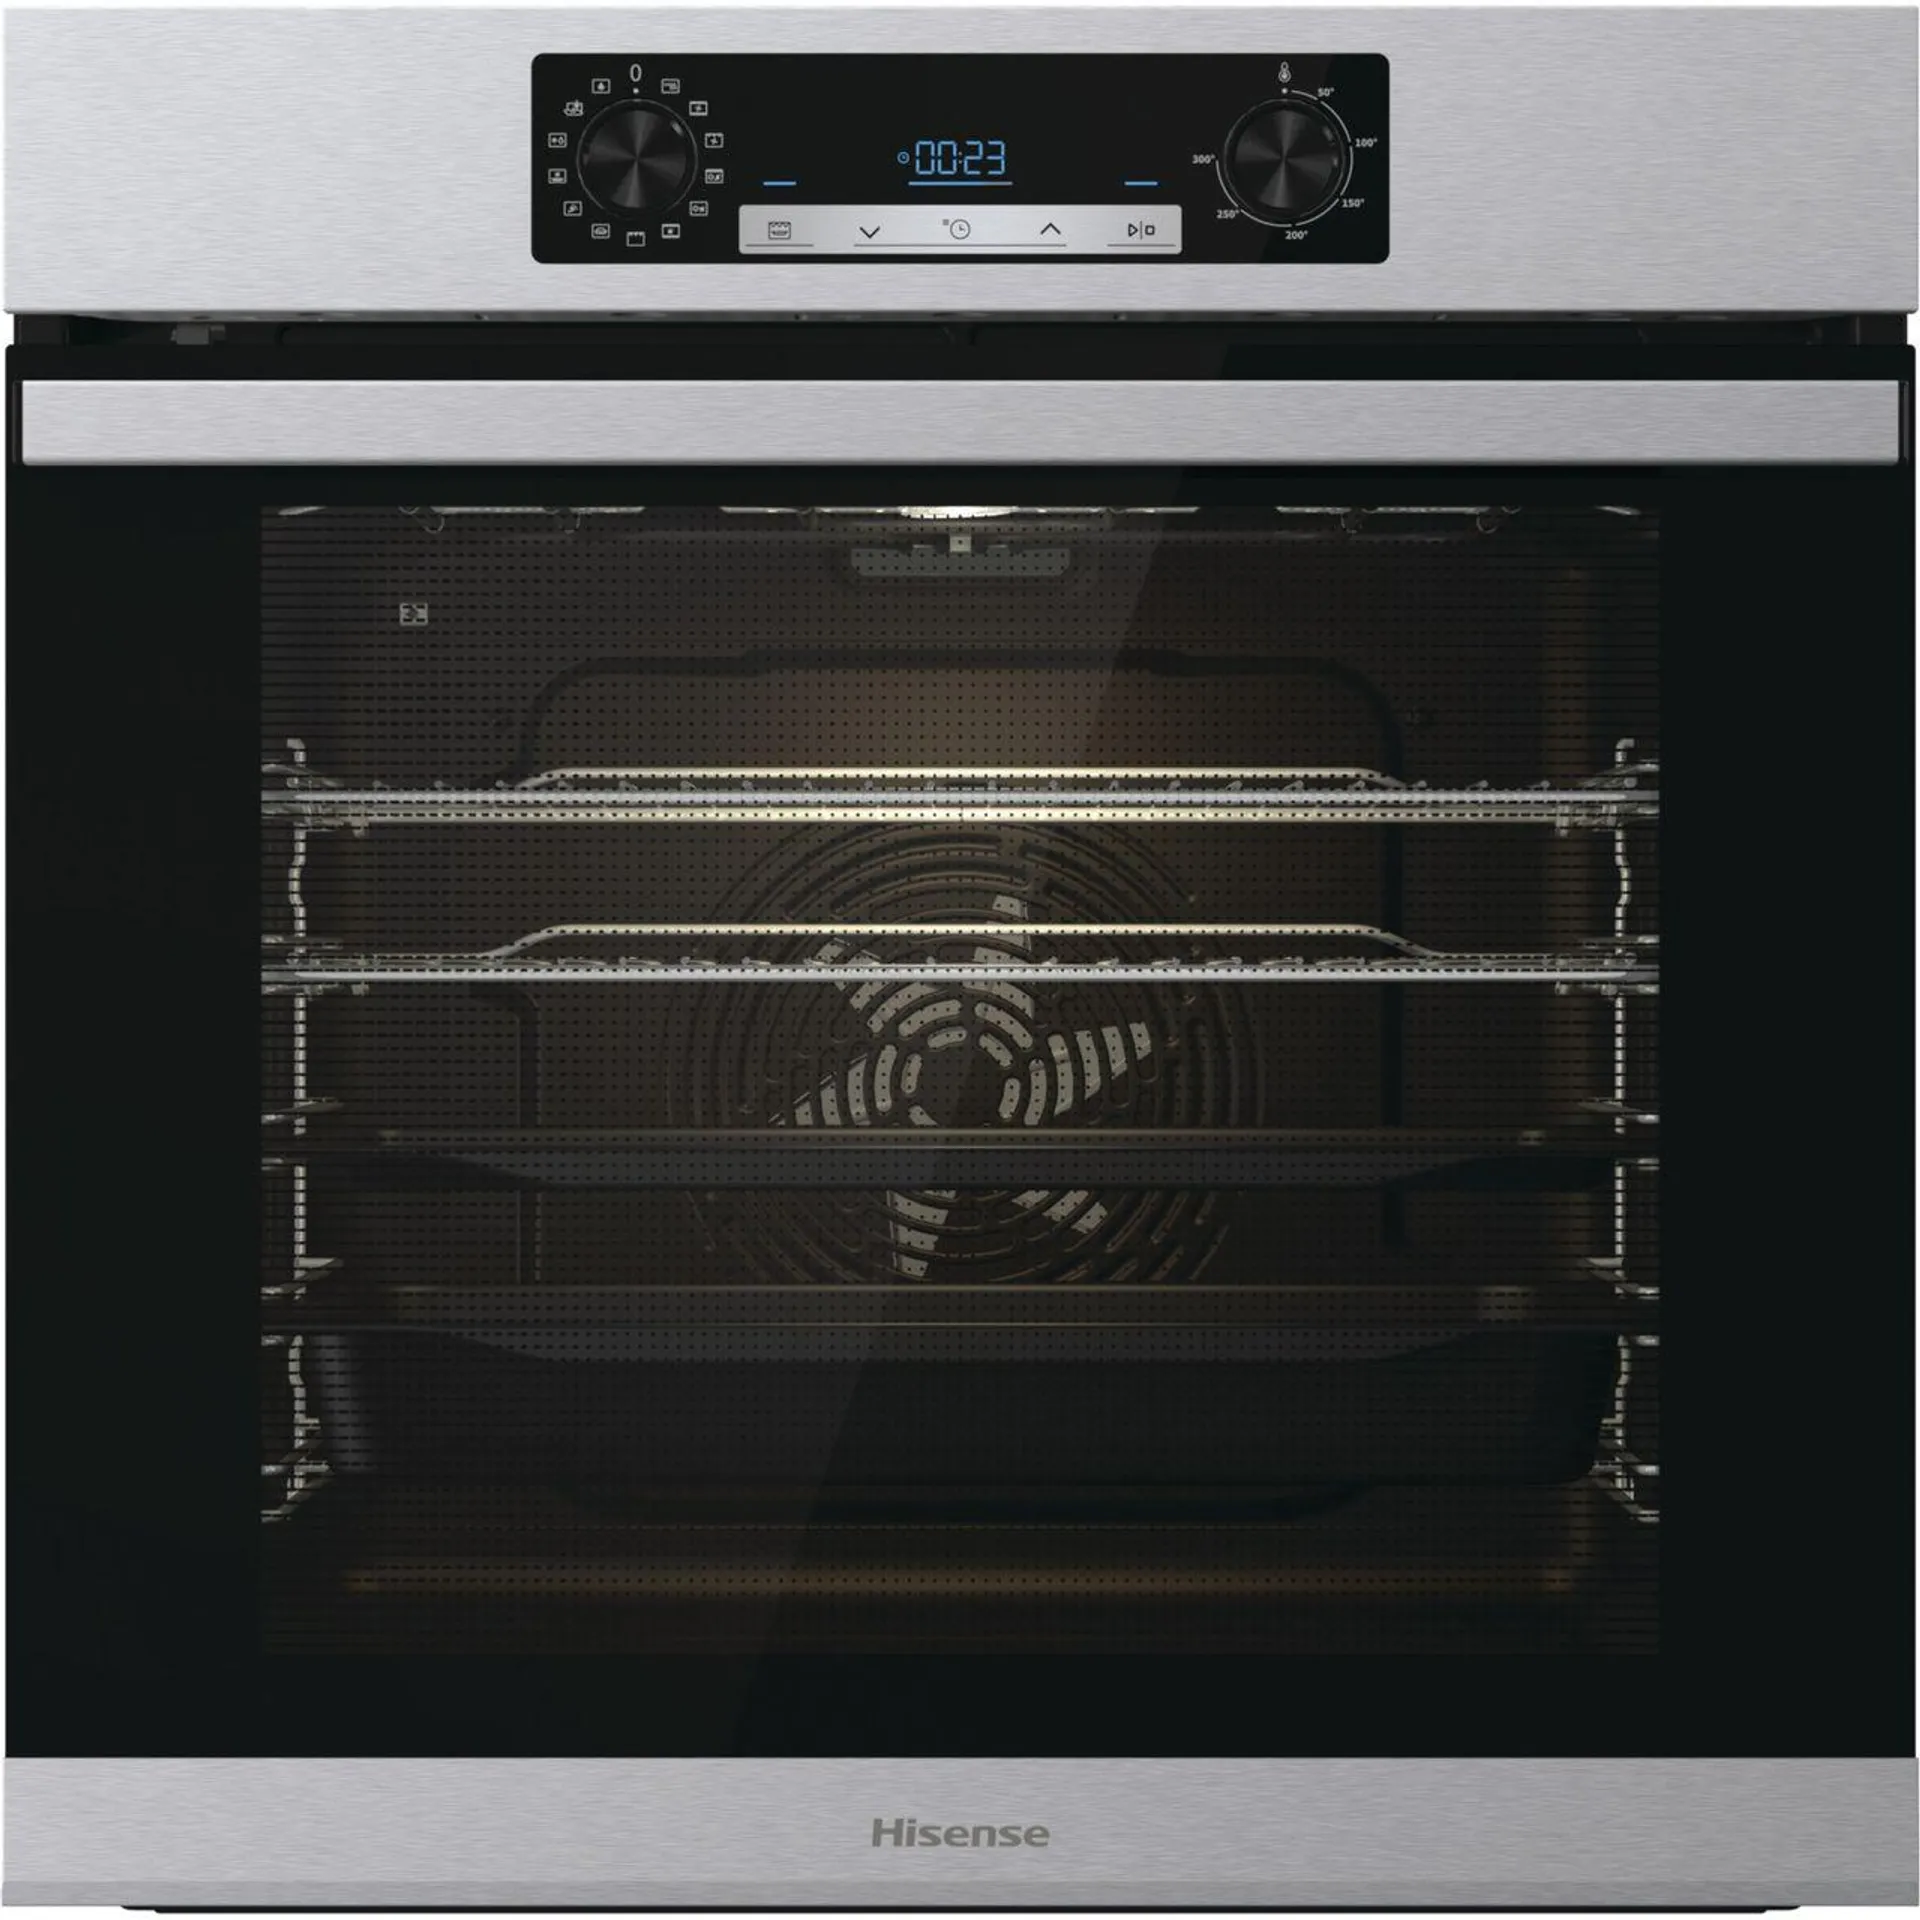 Hisense BSA65222PXUK Built In Electric Single Oven - Stainless Steel - A+ Rated